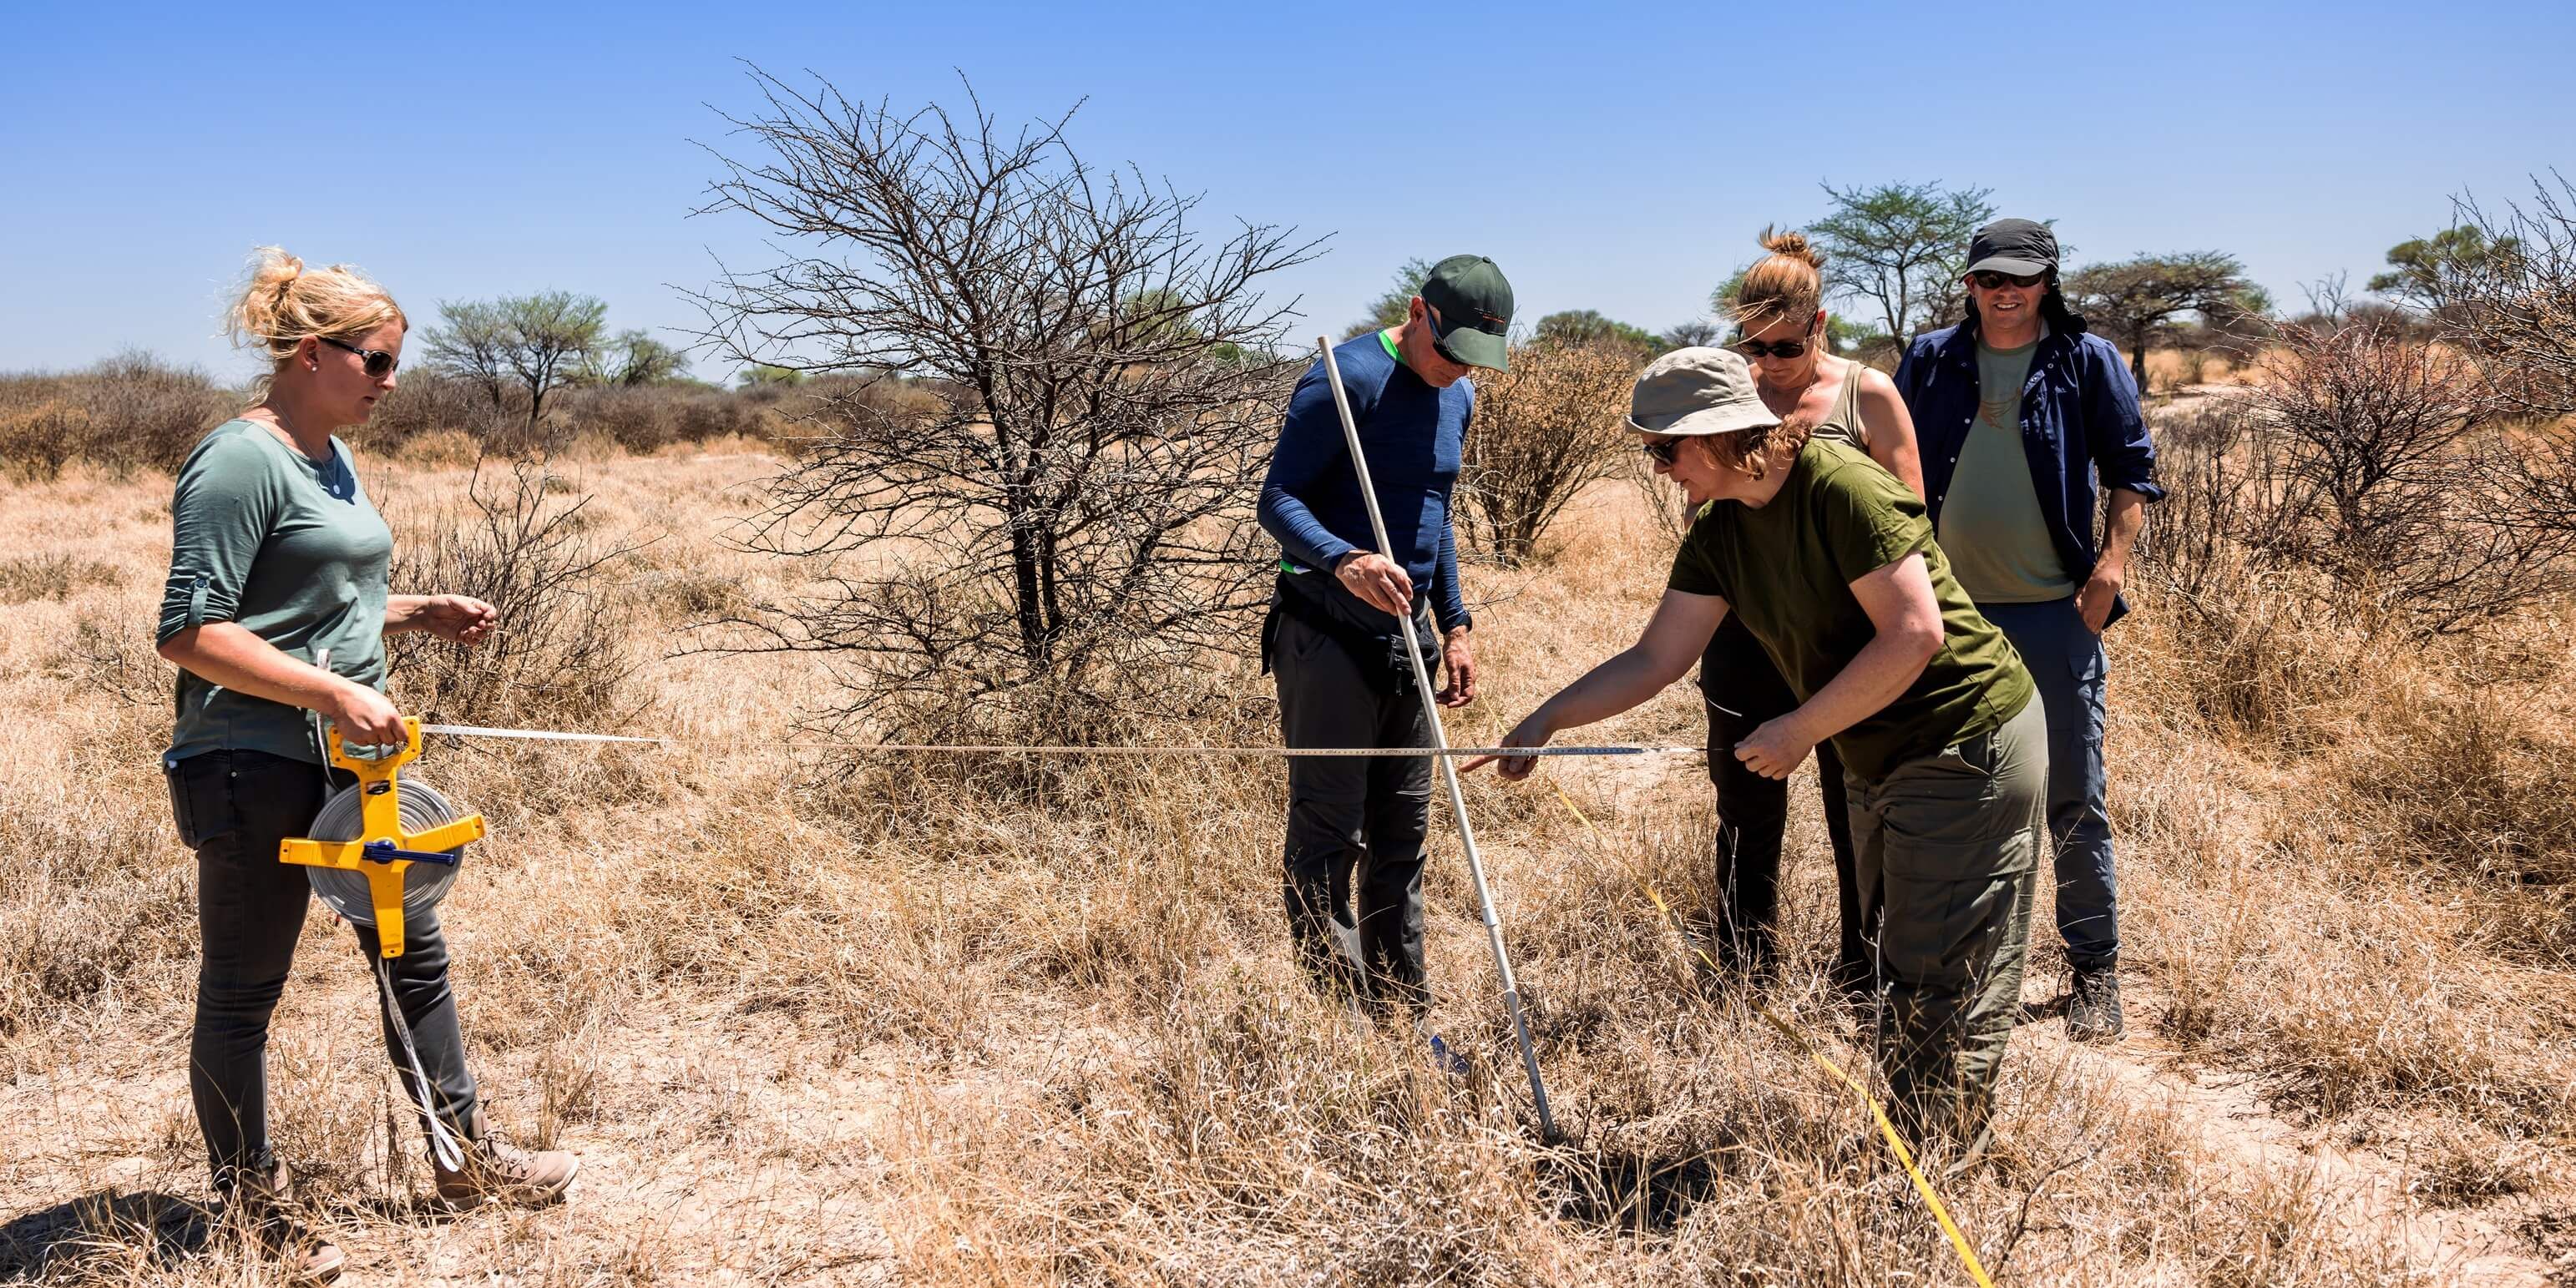 Wildlife conservation in South Africa - Citizen Science in the Kalahari  Desert ⋅ Natucate